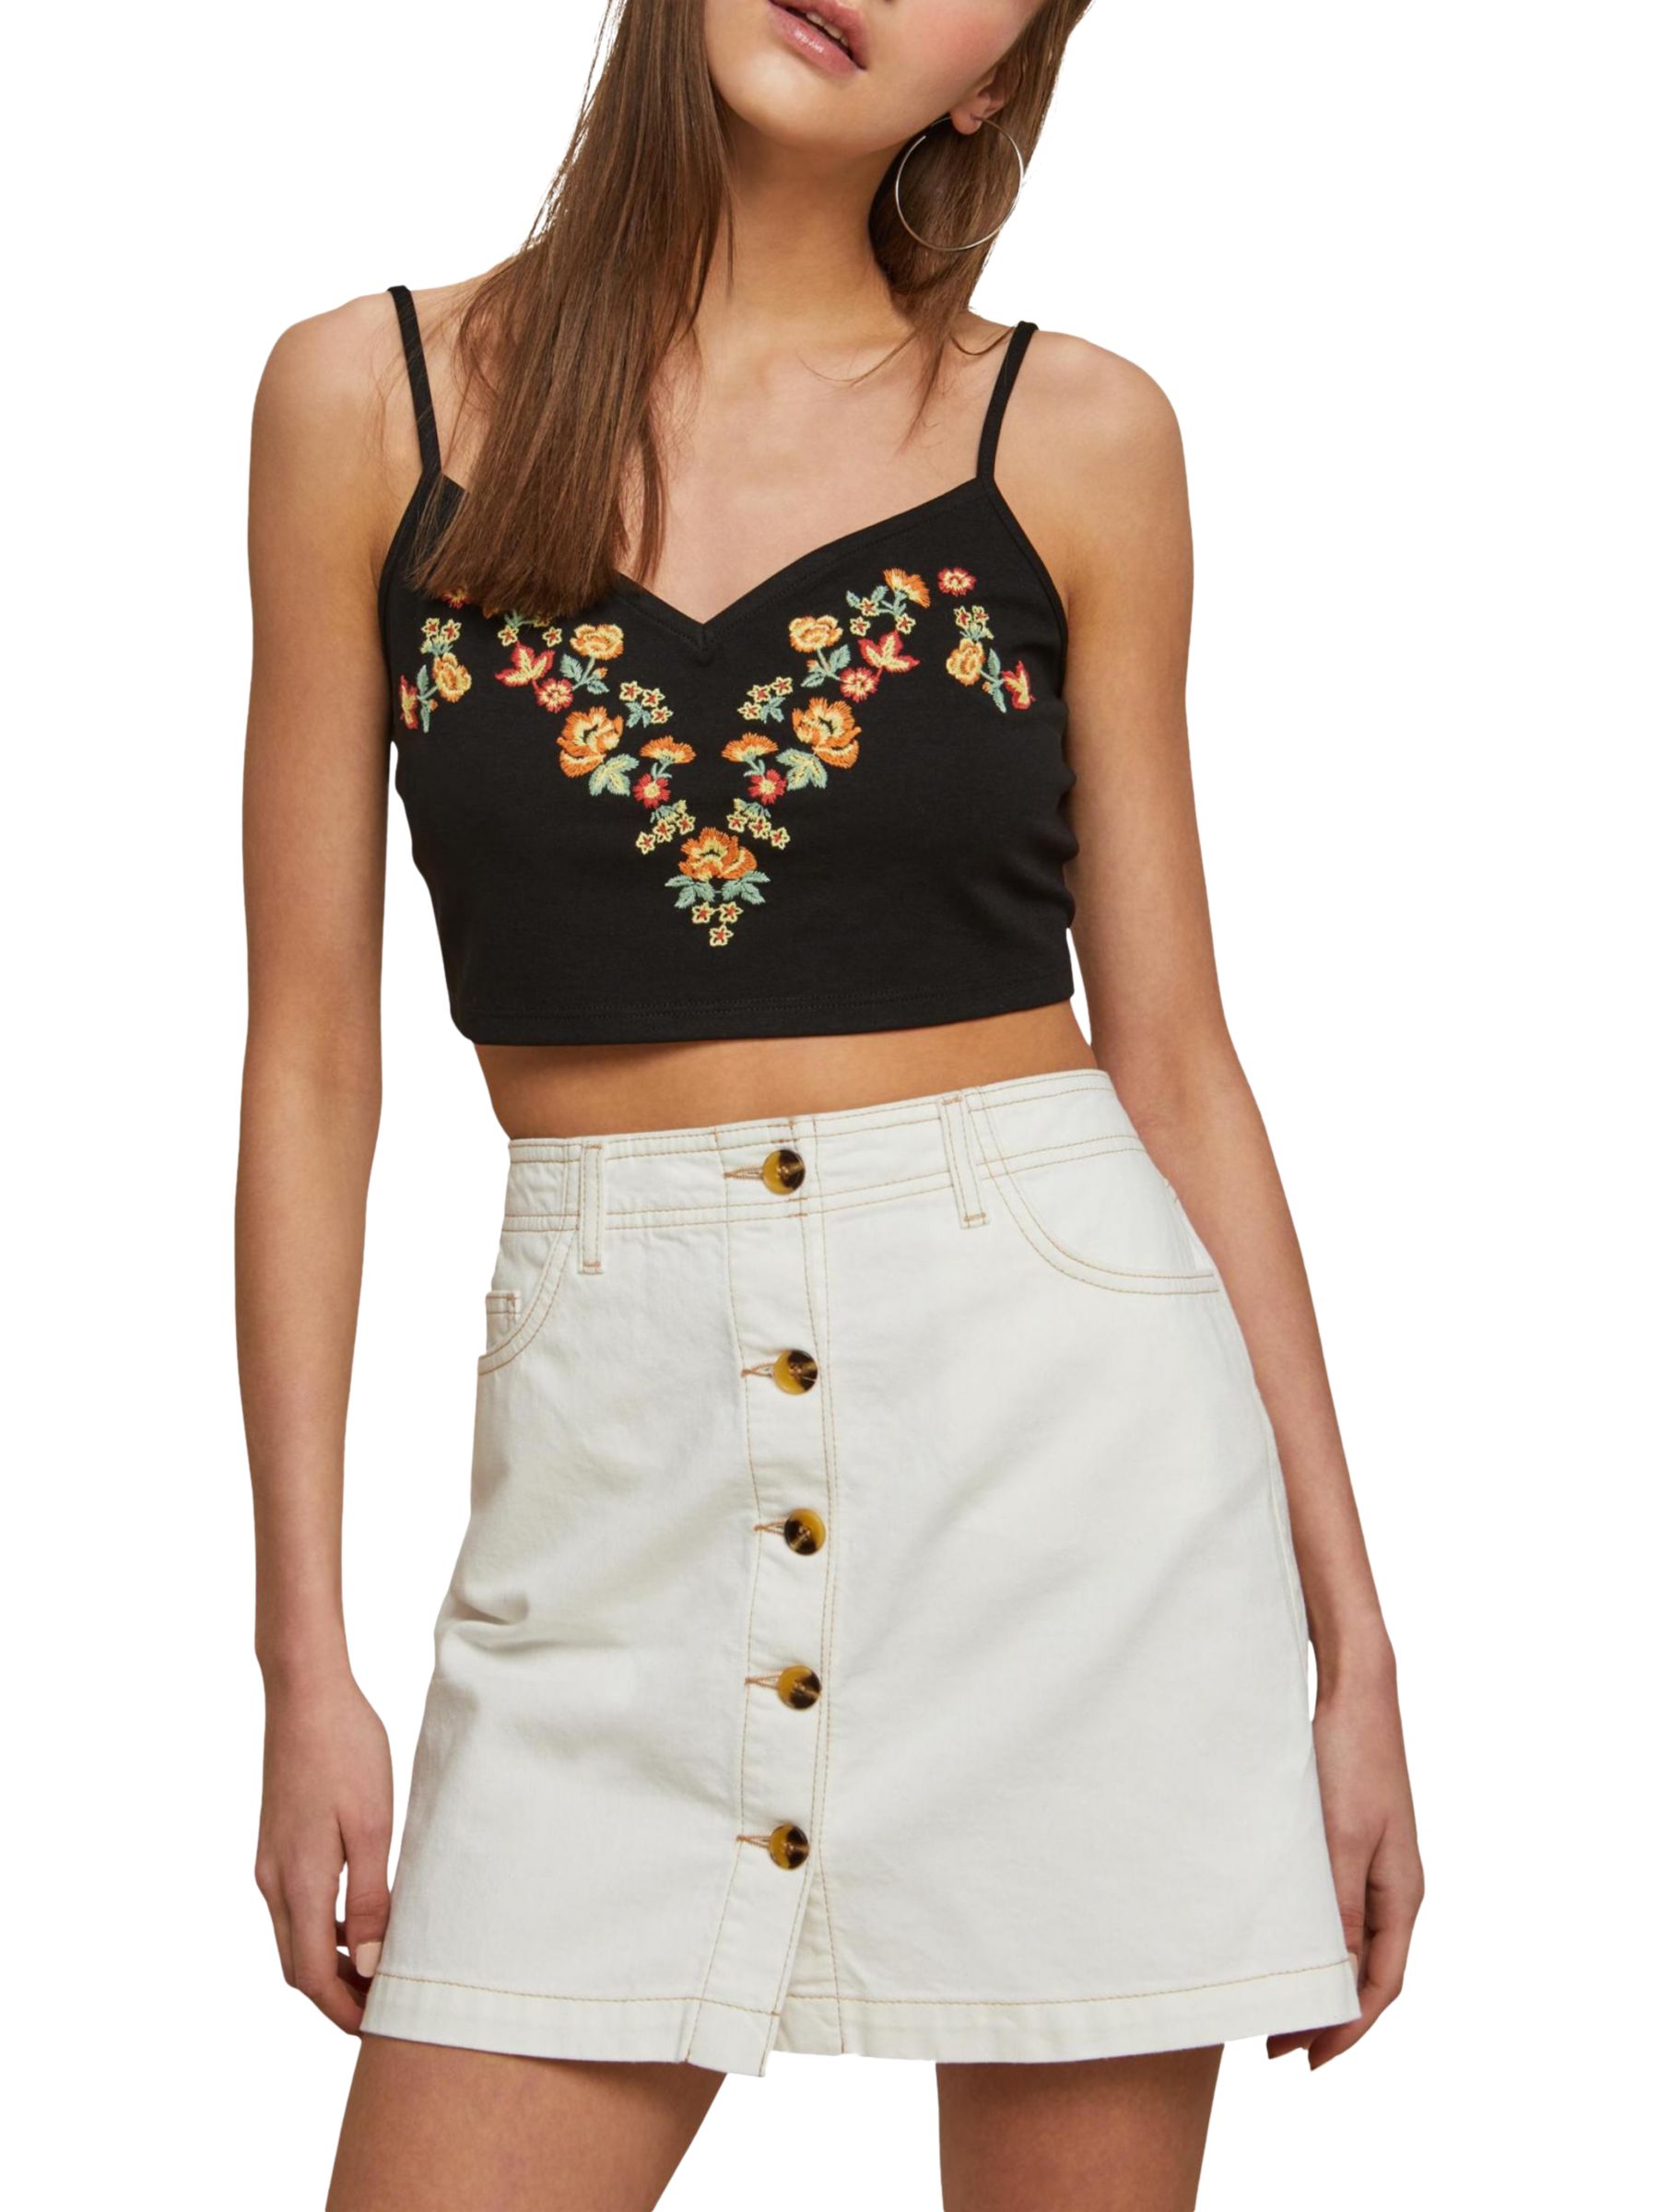 Miss Selfridge Floral Embroidered Camisole Top, Black